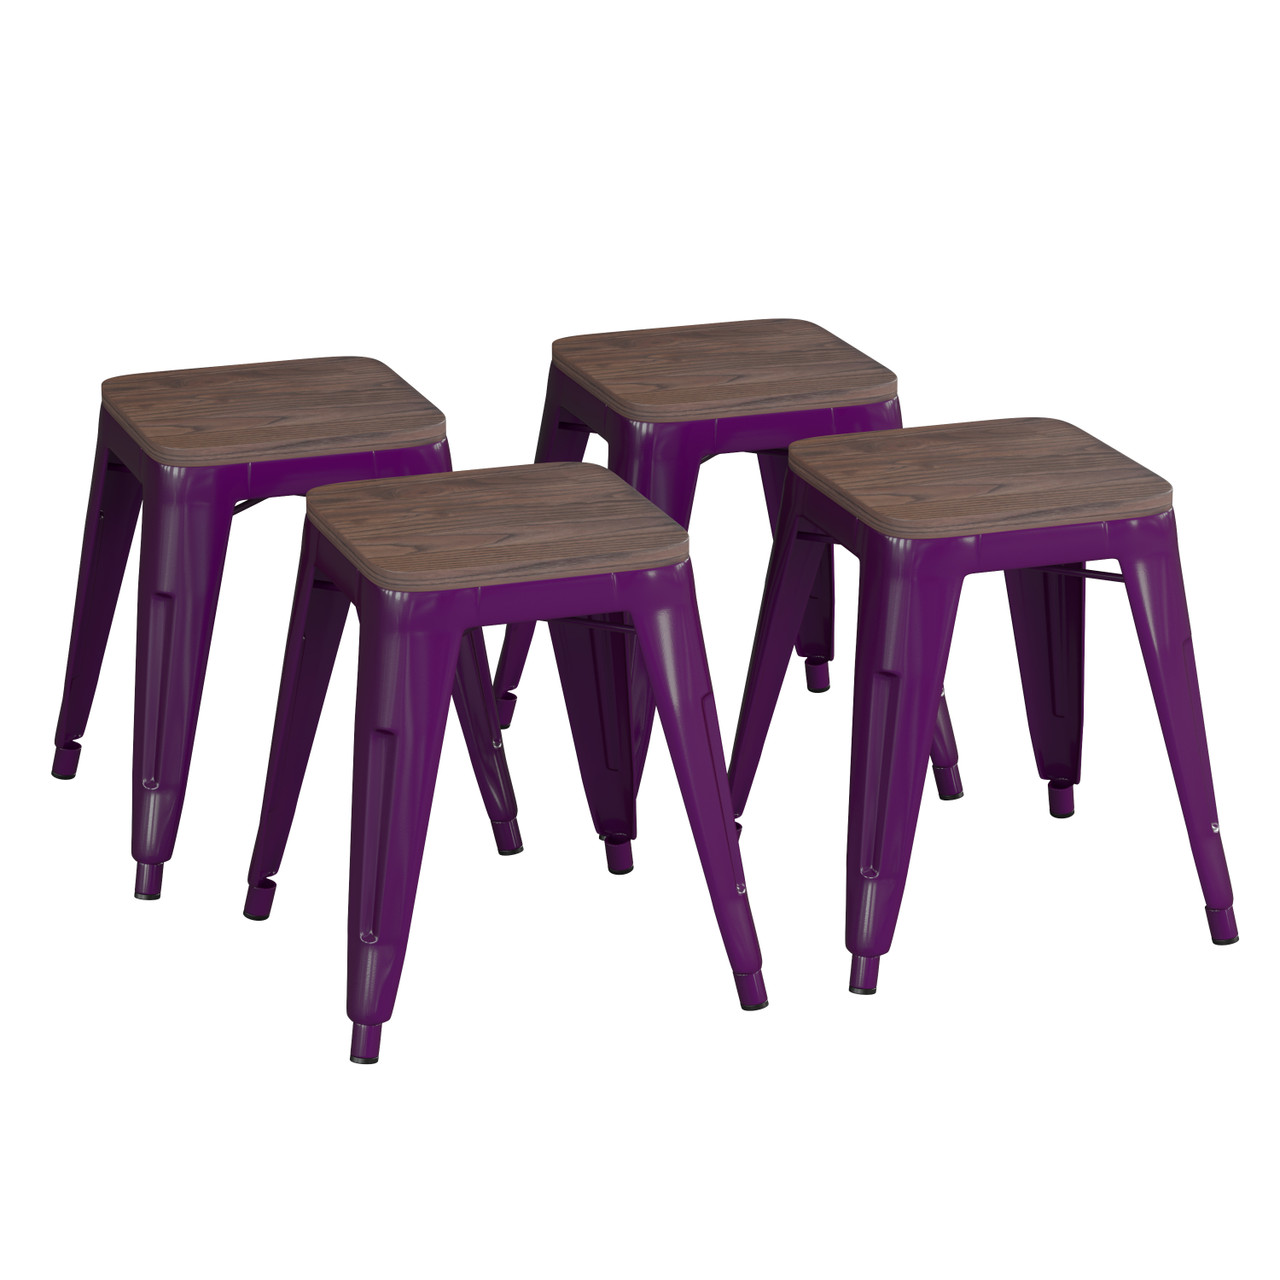 Flash Furniture Kai 18" Backless Table Height Stool w/ Wooden Seat, Stackable Purple Metal Indoor Dining Stool, Commercial Grade Set of 4, Model#